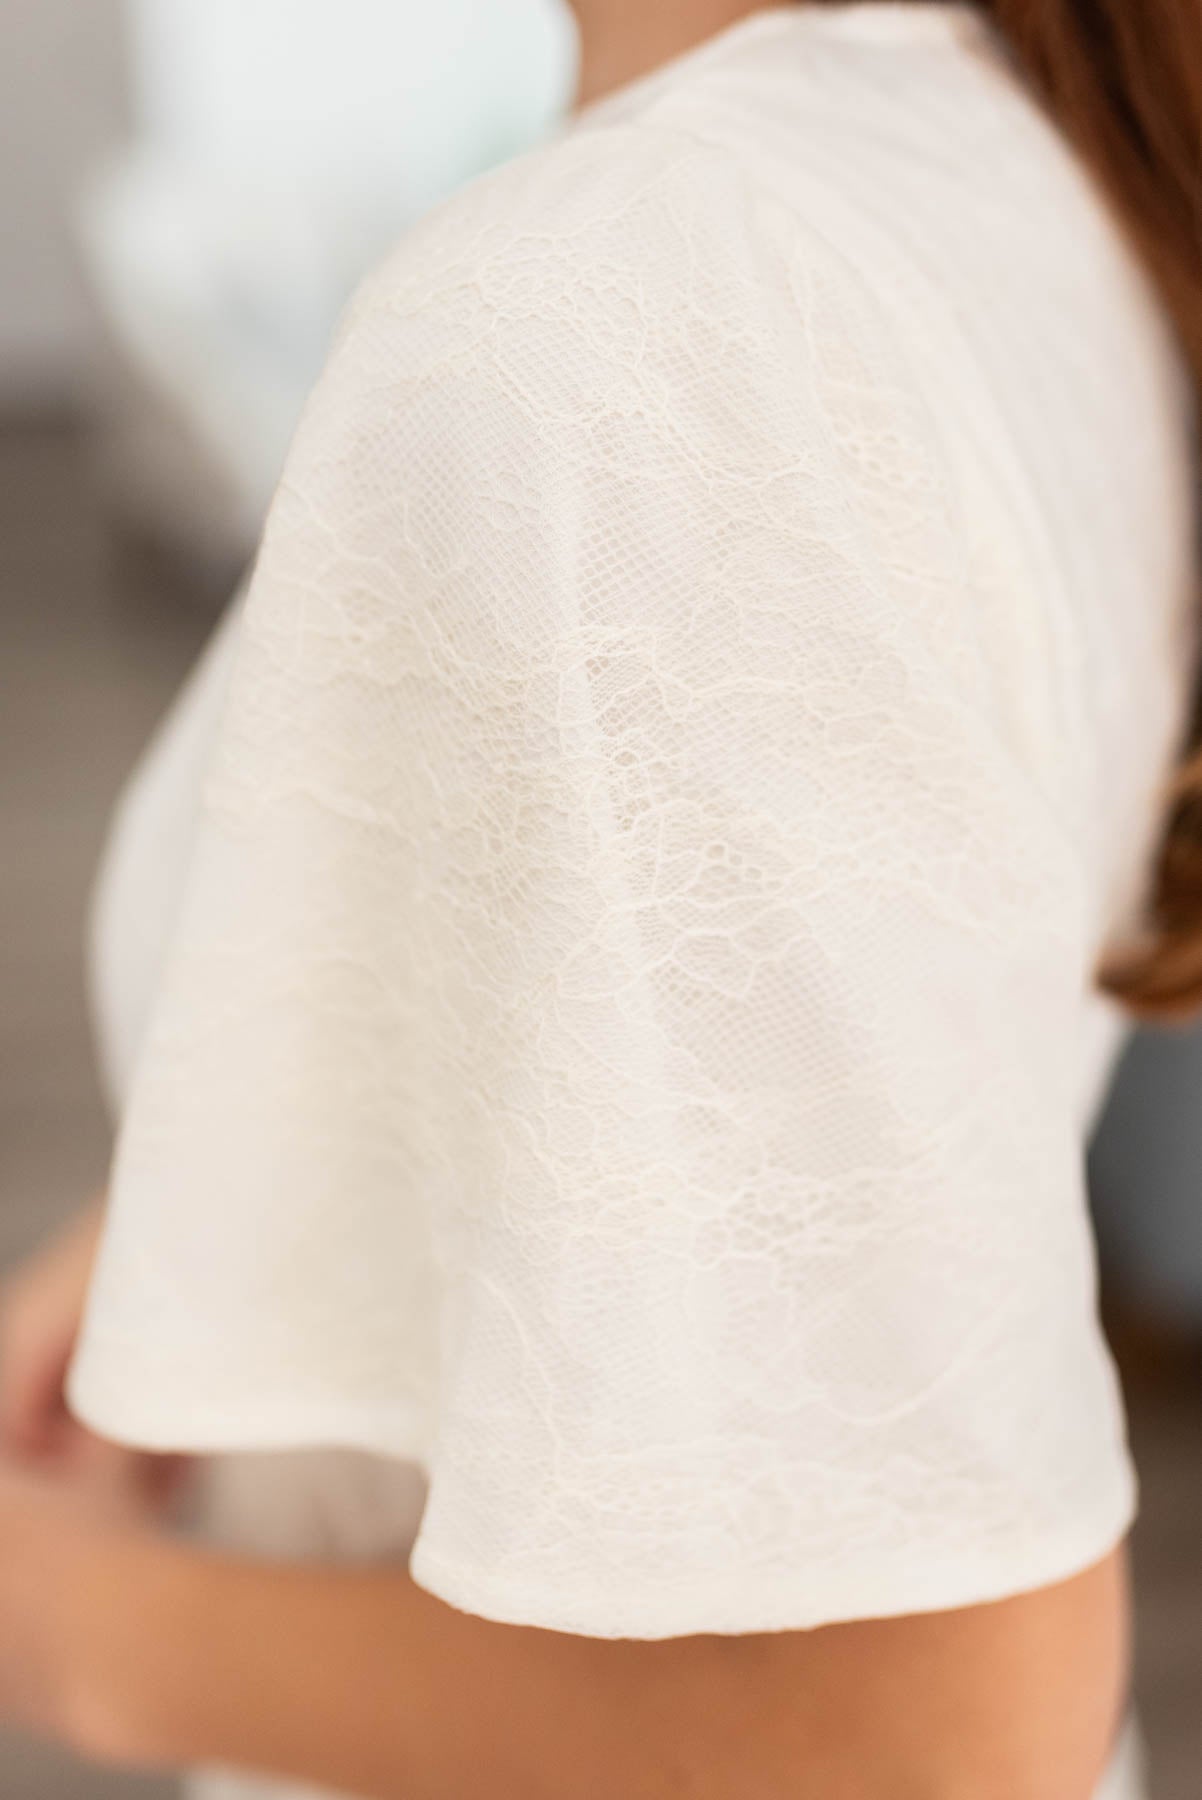 The sleeve and fabric on the white lace dress